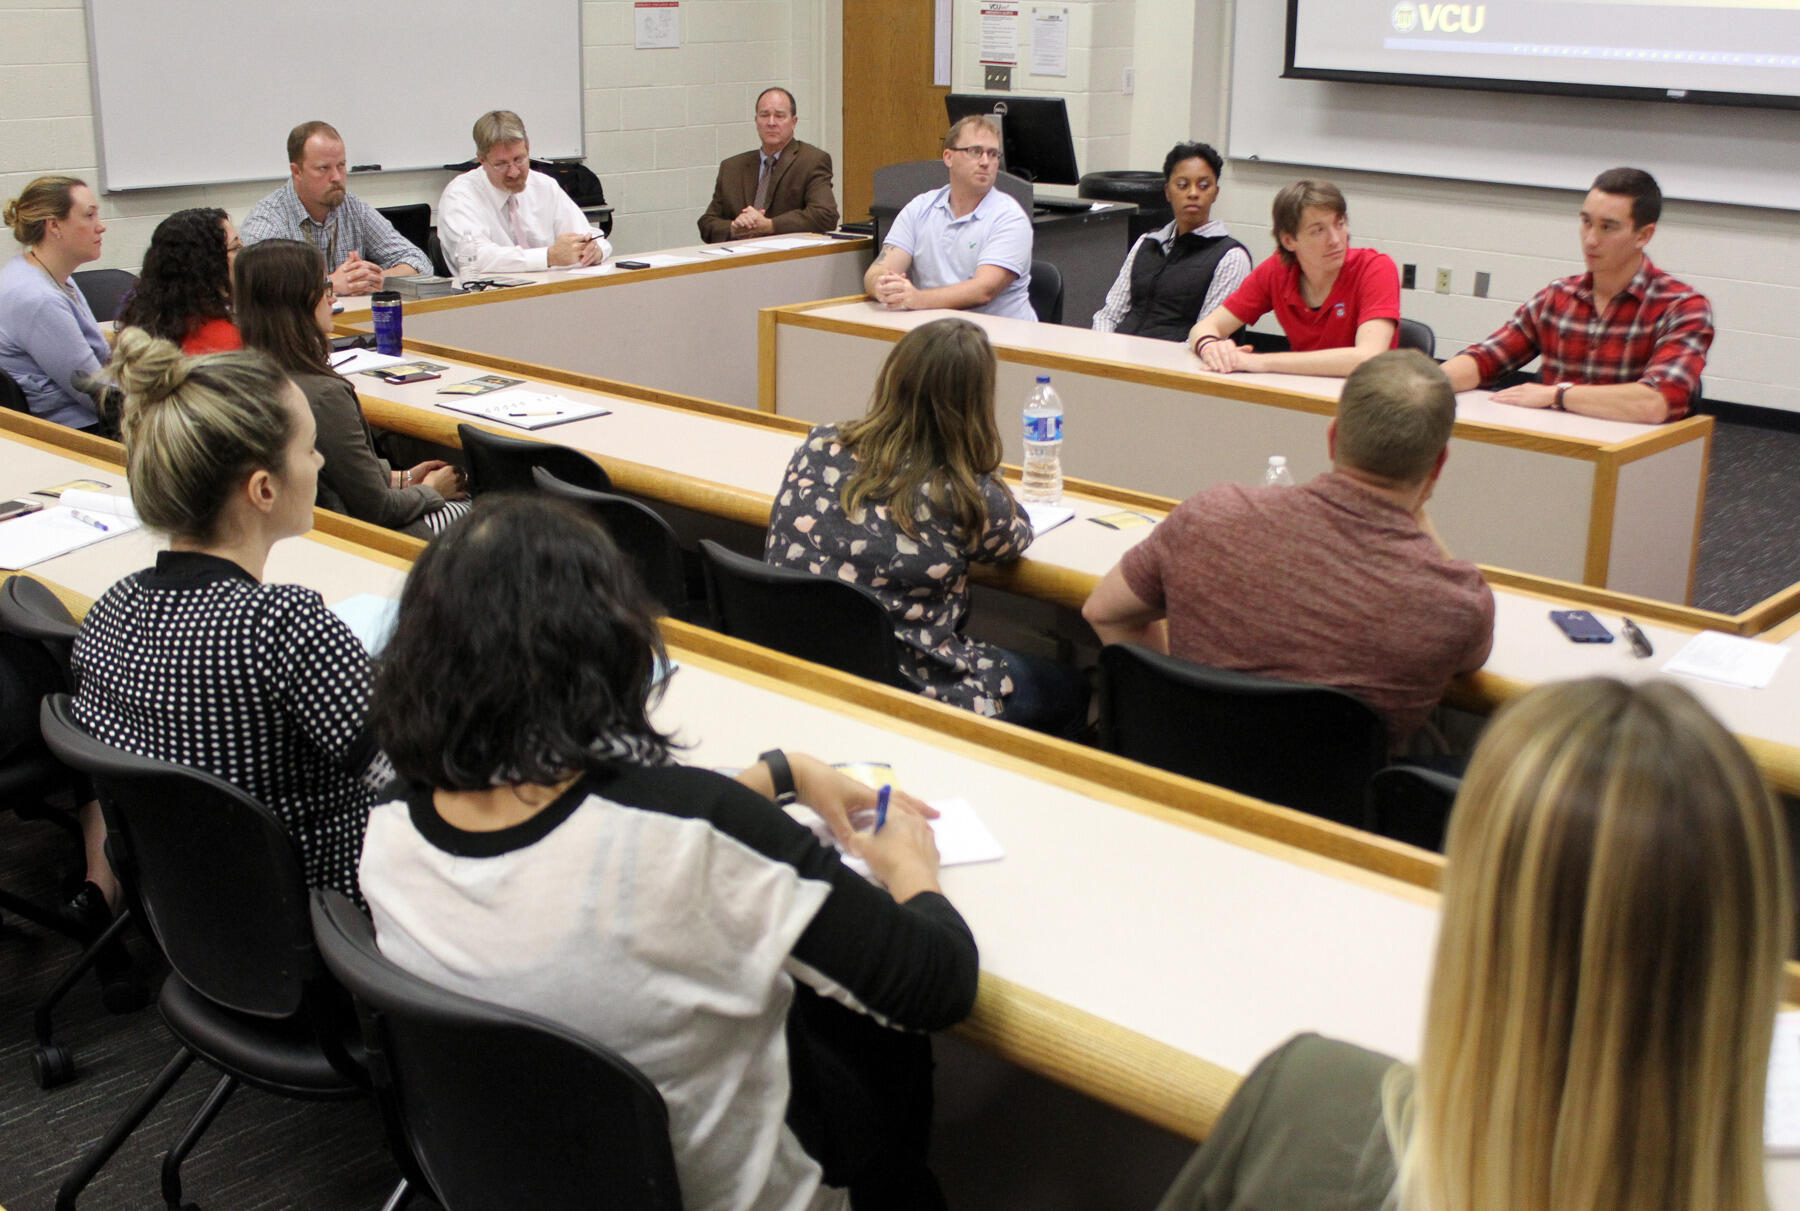 Student veteran and active duty panelists answer questions during the student panel portion of the Green Zone training.